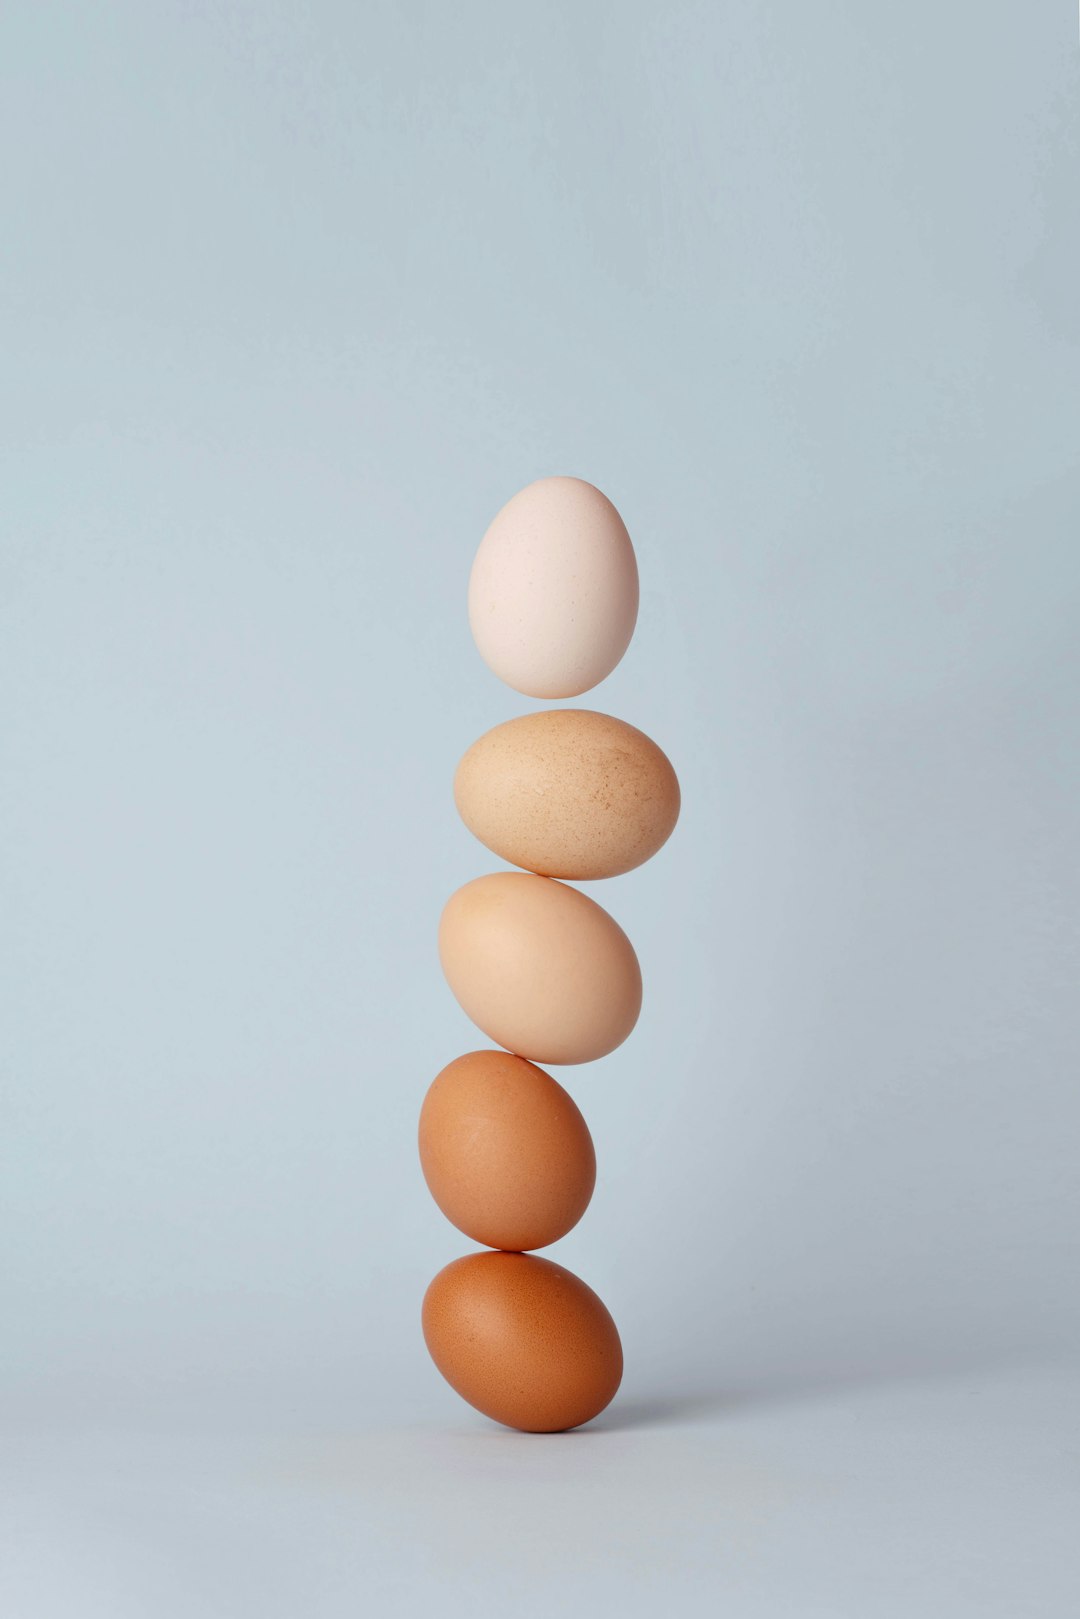  brown and white eggs weighing balance